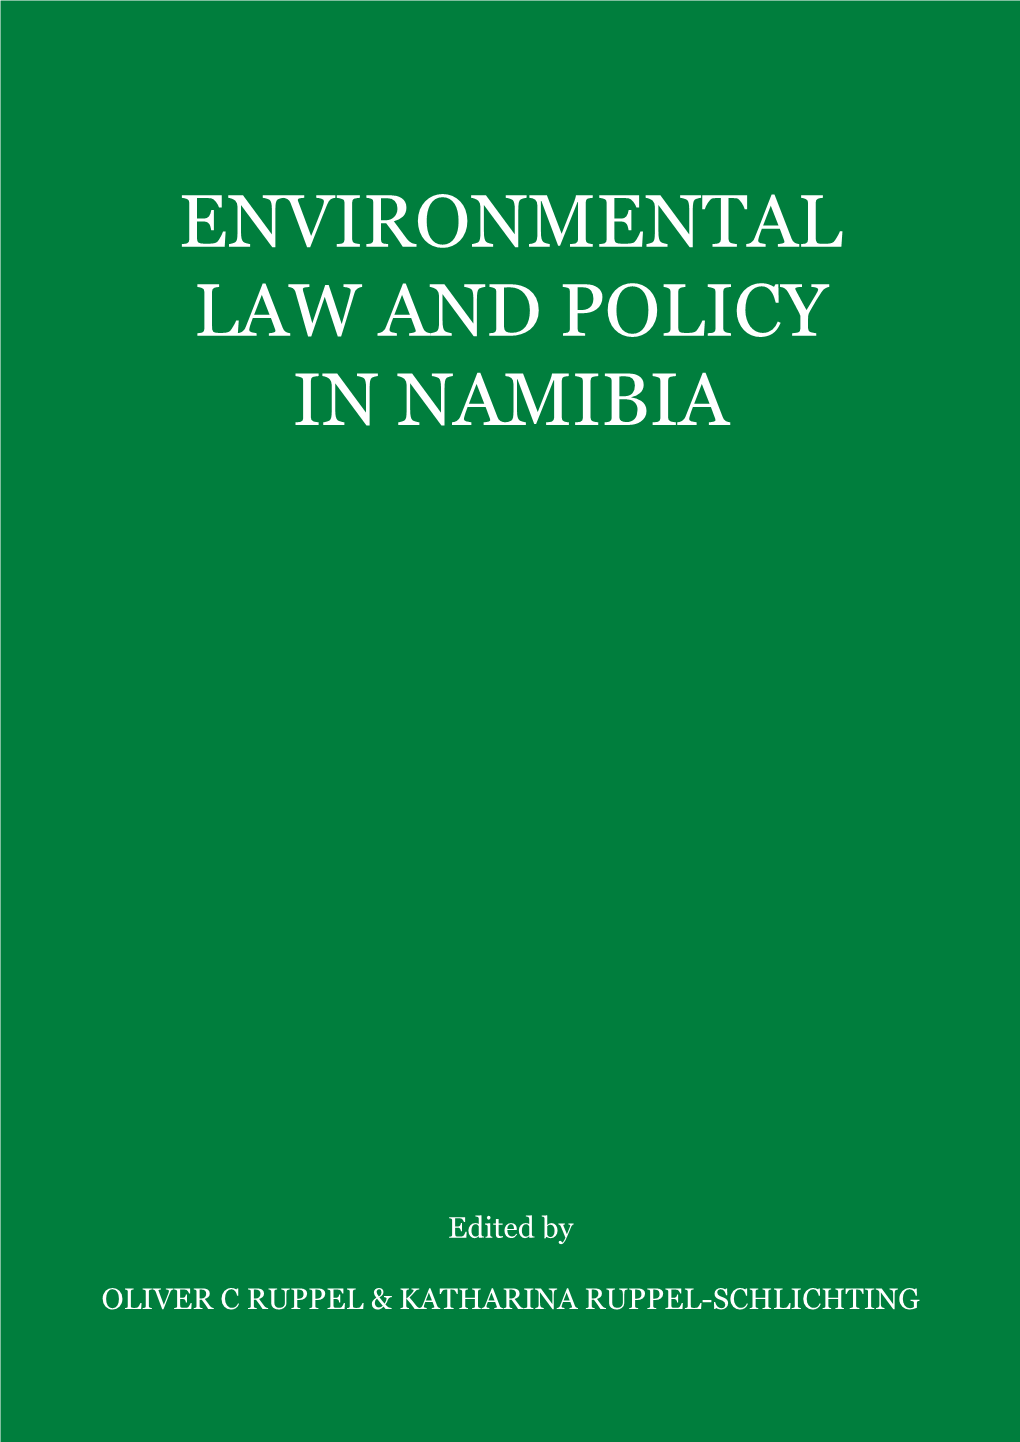 Draft Environmental Law and Policy for Namibia 2011